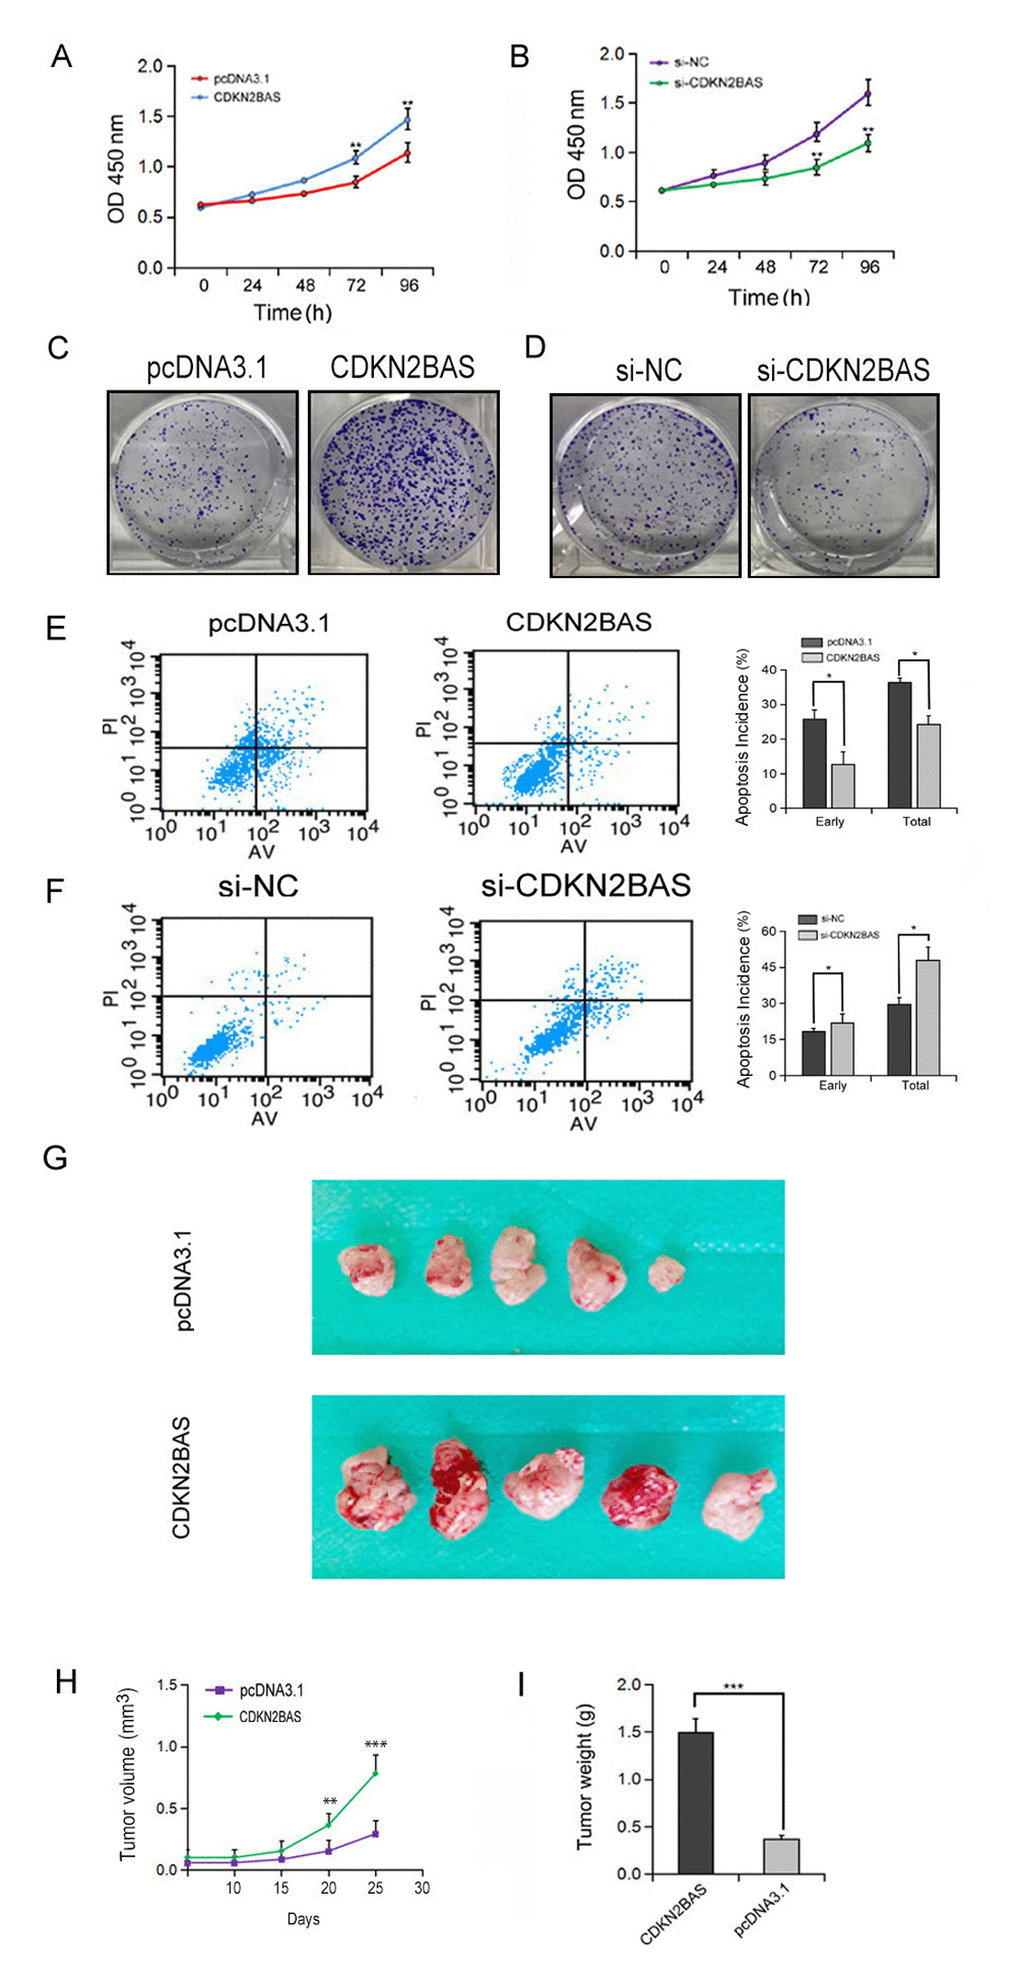 The effect of CDKN2BAS on HCC cell growth in vitro and in vivo. (A-B) The effect of overexpression or knockdown of CDKN2BAS on the growth of HCCLM3 cells was detected by MTT assay; (C-D) The effect of overexpression or knockdown of CDKN2BAS on the colony formation of HCCLM3 cells was detected by colony formation assay; (E-F) The effect of CDKN2BAS on EPI-induced apoptosis in HCCLM3 cells was detected by flow cytometry; (G) Tumor xenograft model in nude mice. CDKN2BAS-transfected HCCLM3 cells and control cells were inoculated to the right side of nude mice. (H-I) The tumor volume and tumor weight were analyzed. *P P P 